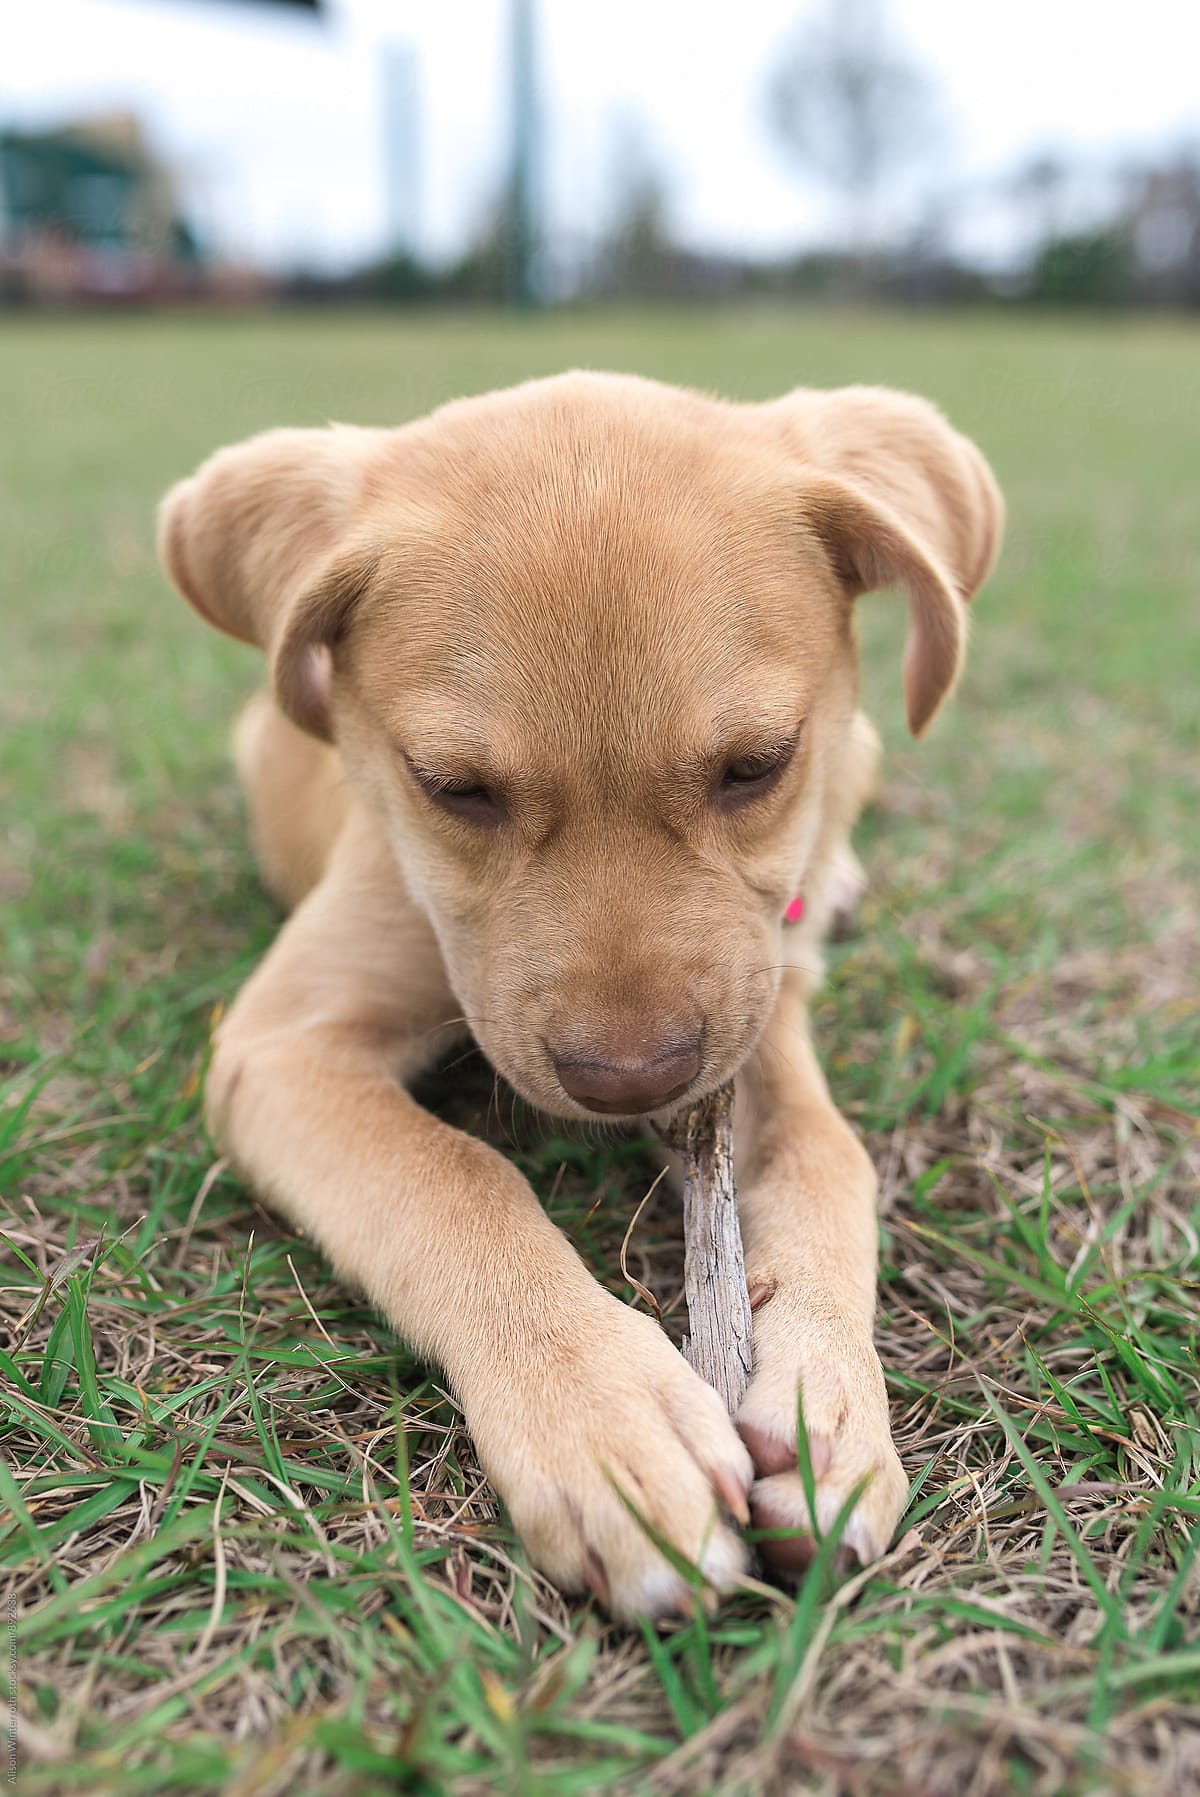 A Puppy Chewing Intently On A Stick